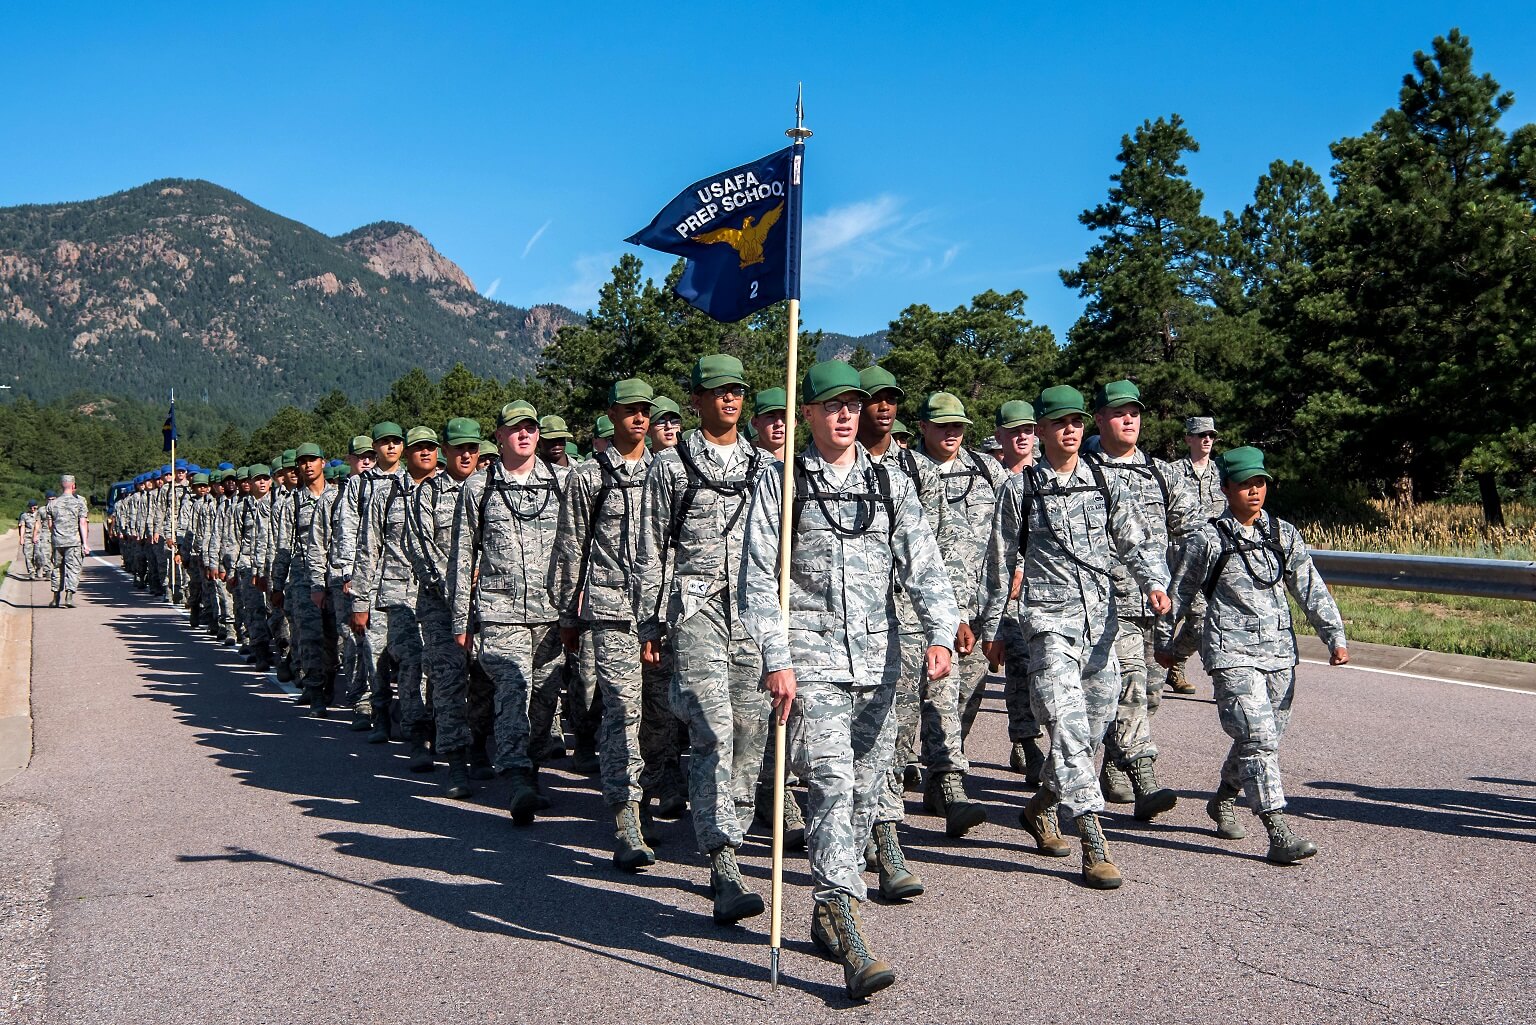 Prep School cadets marching